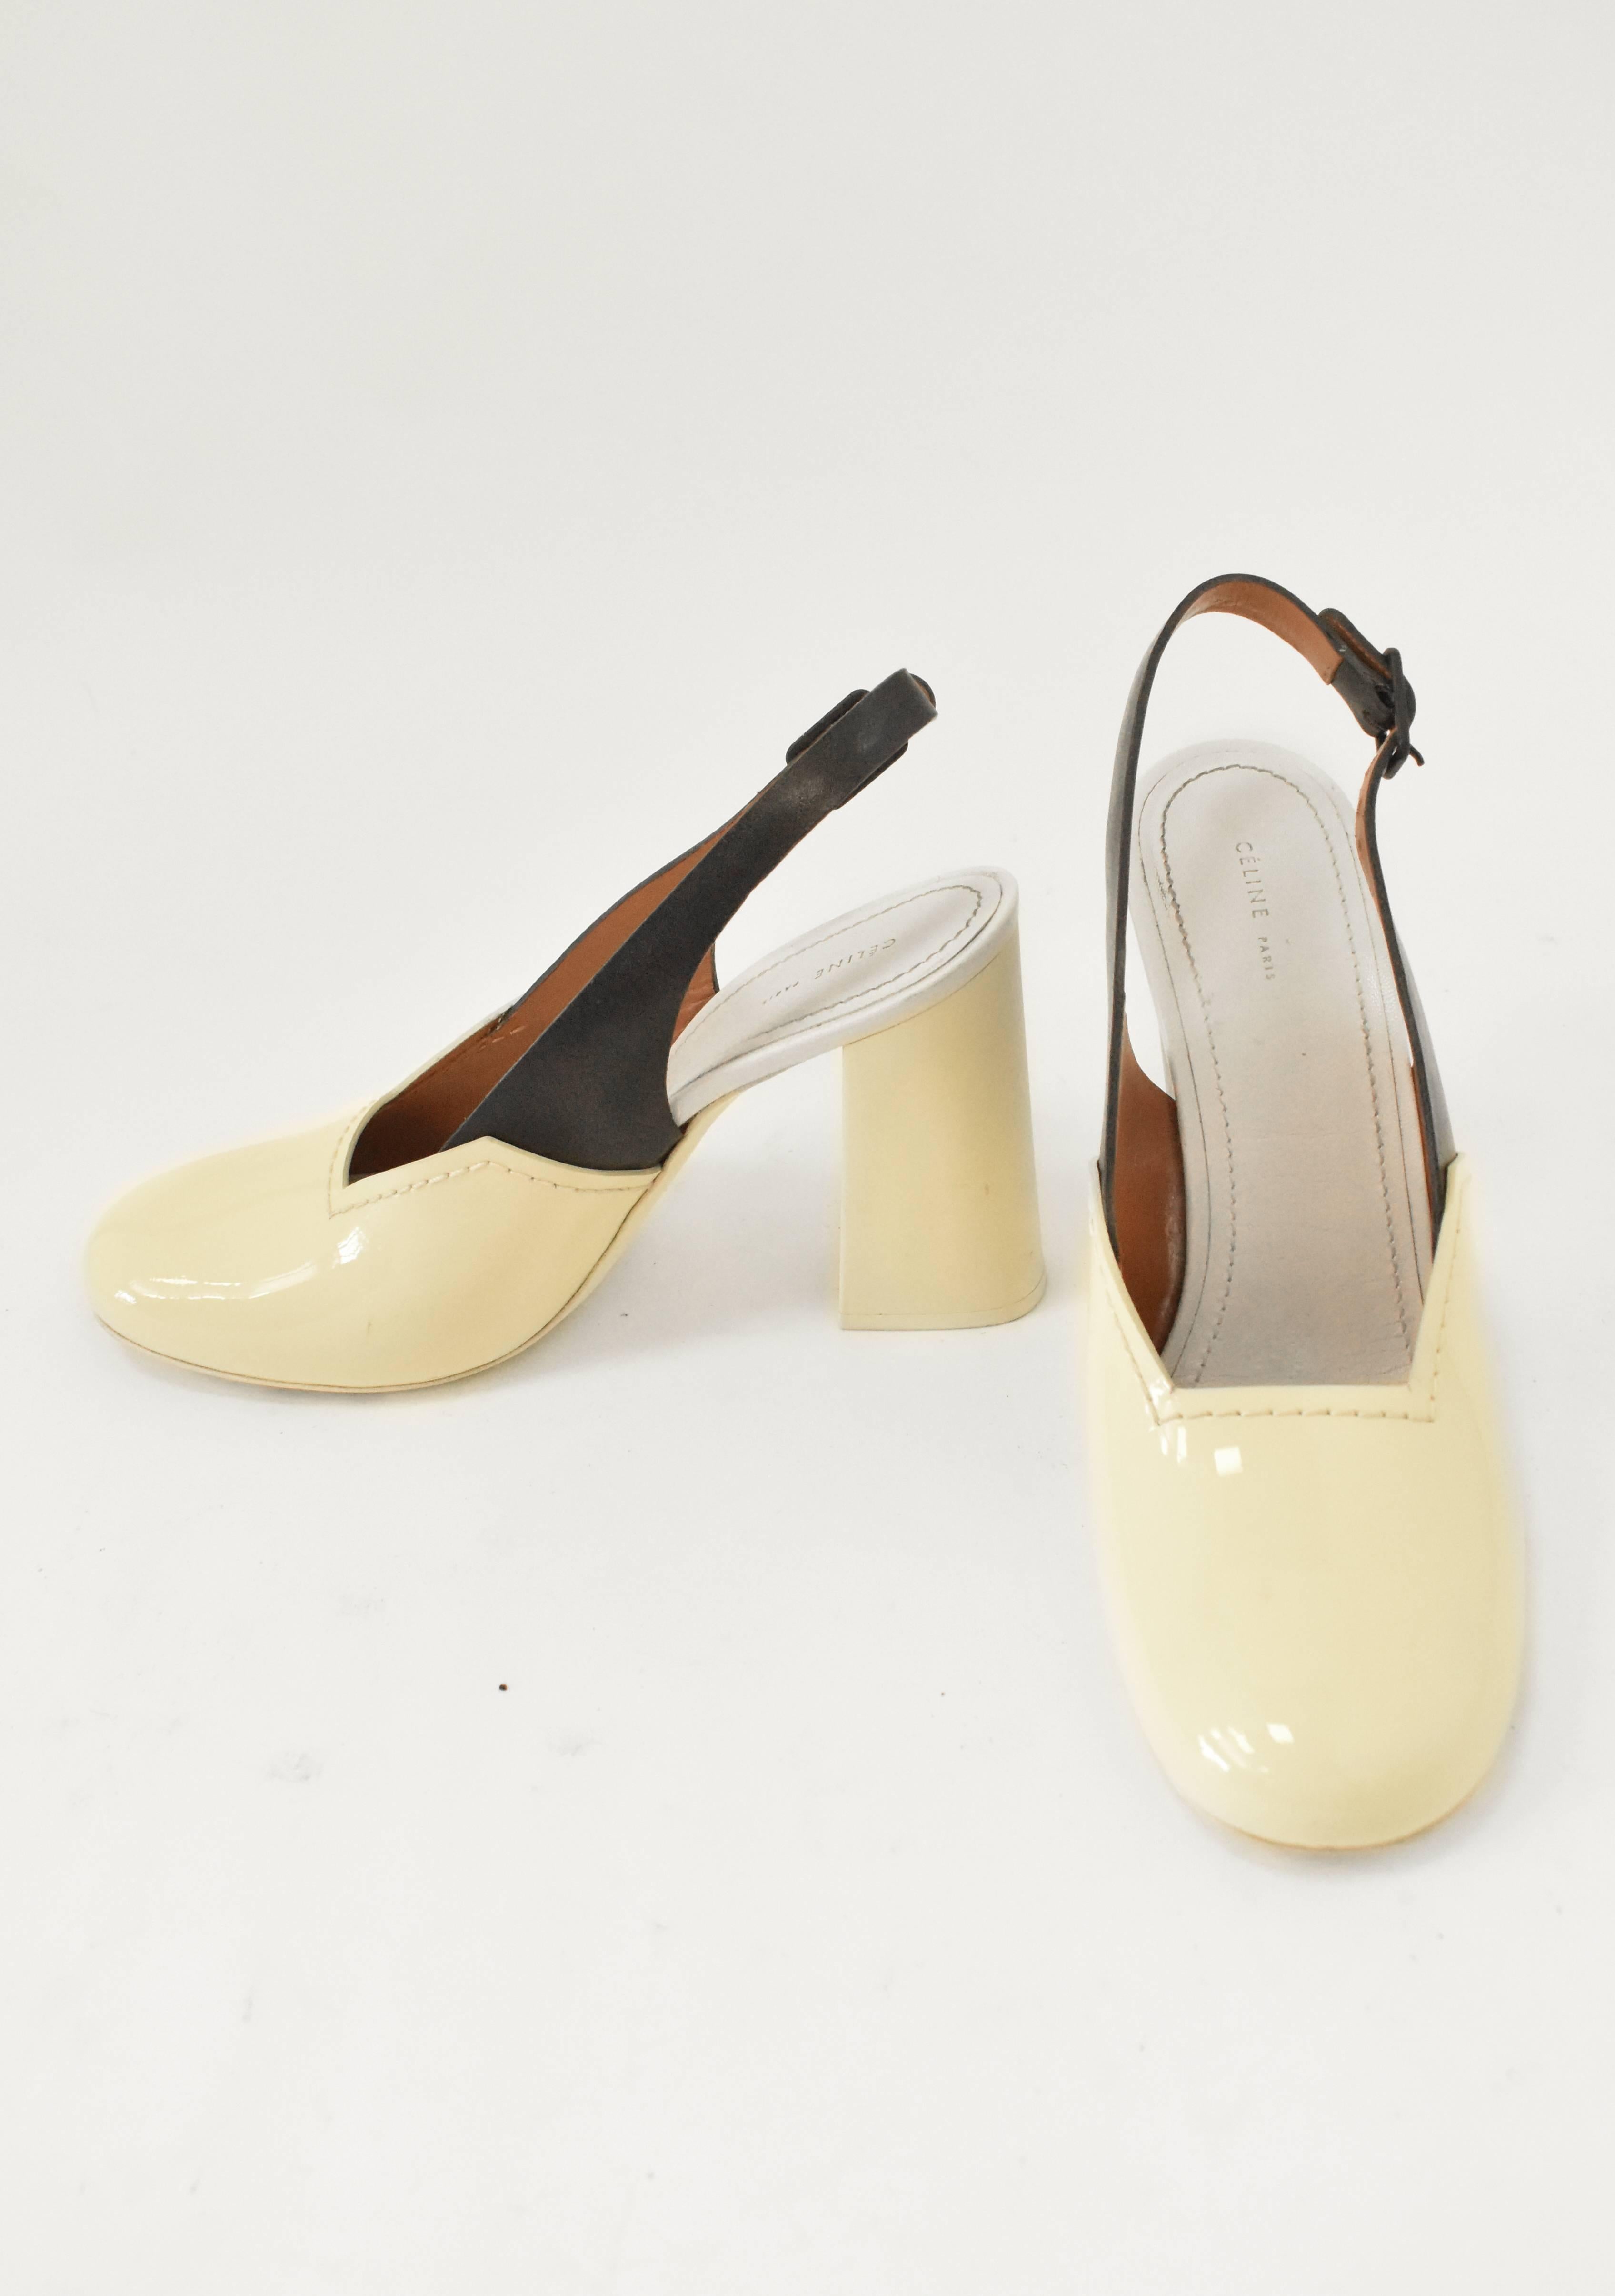 A pair of elegant and modern heels from Celine. The round toe shoes are made from cream patent leather with a contrast black leather slingback strap and buckle. They also feature a chunky 4 inch heel made from rubber giving the shoes an interesting